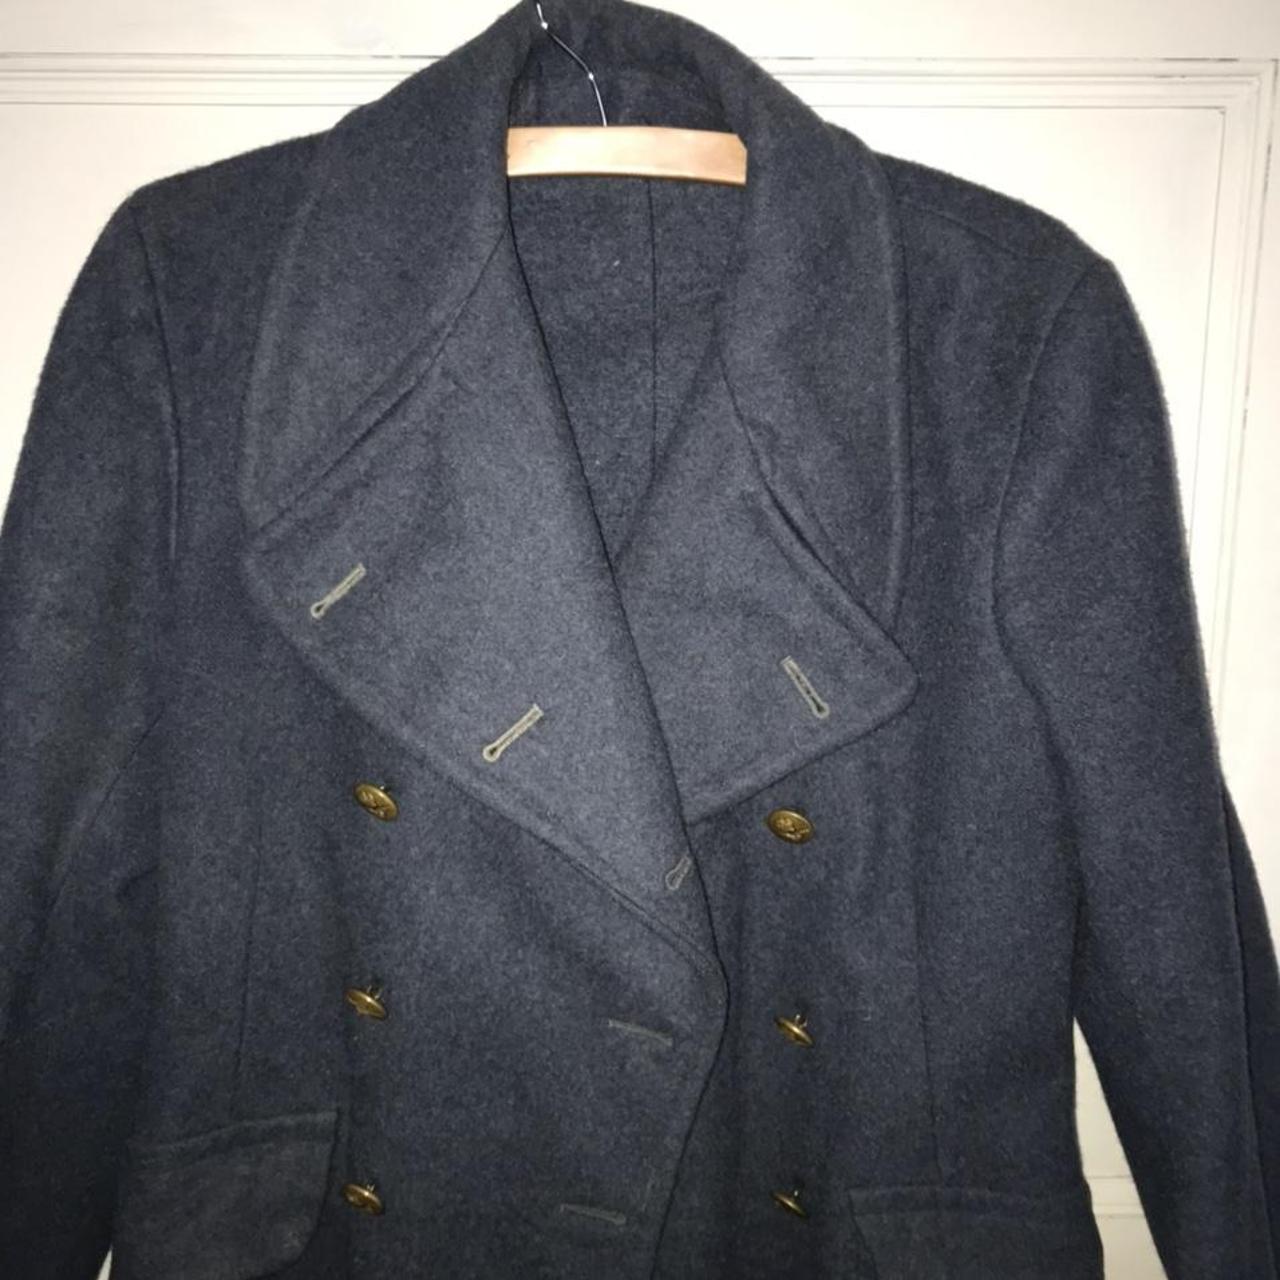 Vintage 1950s airforce greatcoat Small, described as... - Depop